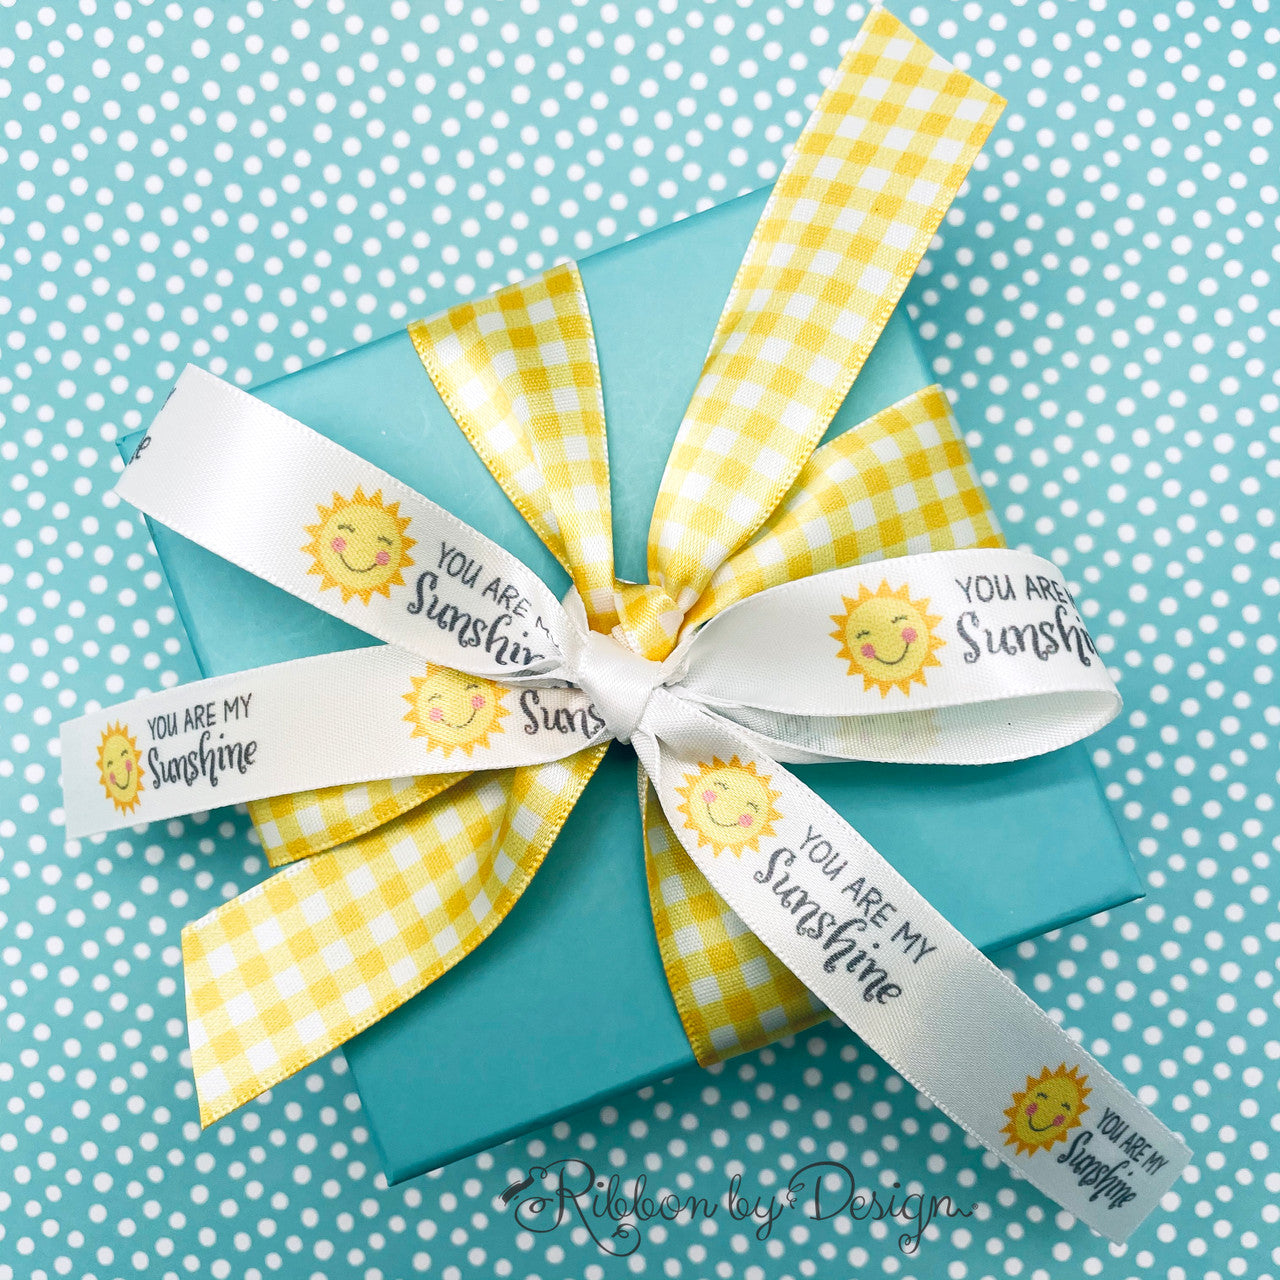 Mix and match our adorable You are my Sunshine with yellow and white gingham for the prettiest gifts, wreaths and party decor trending now!